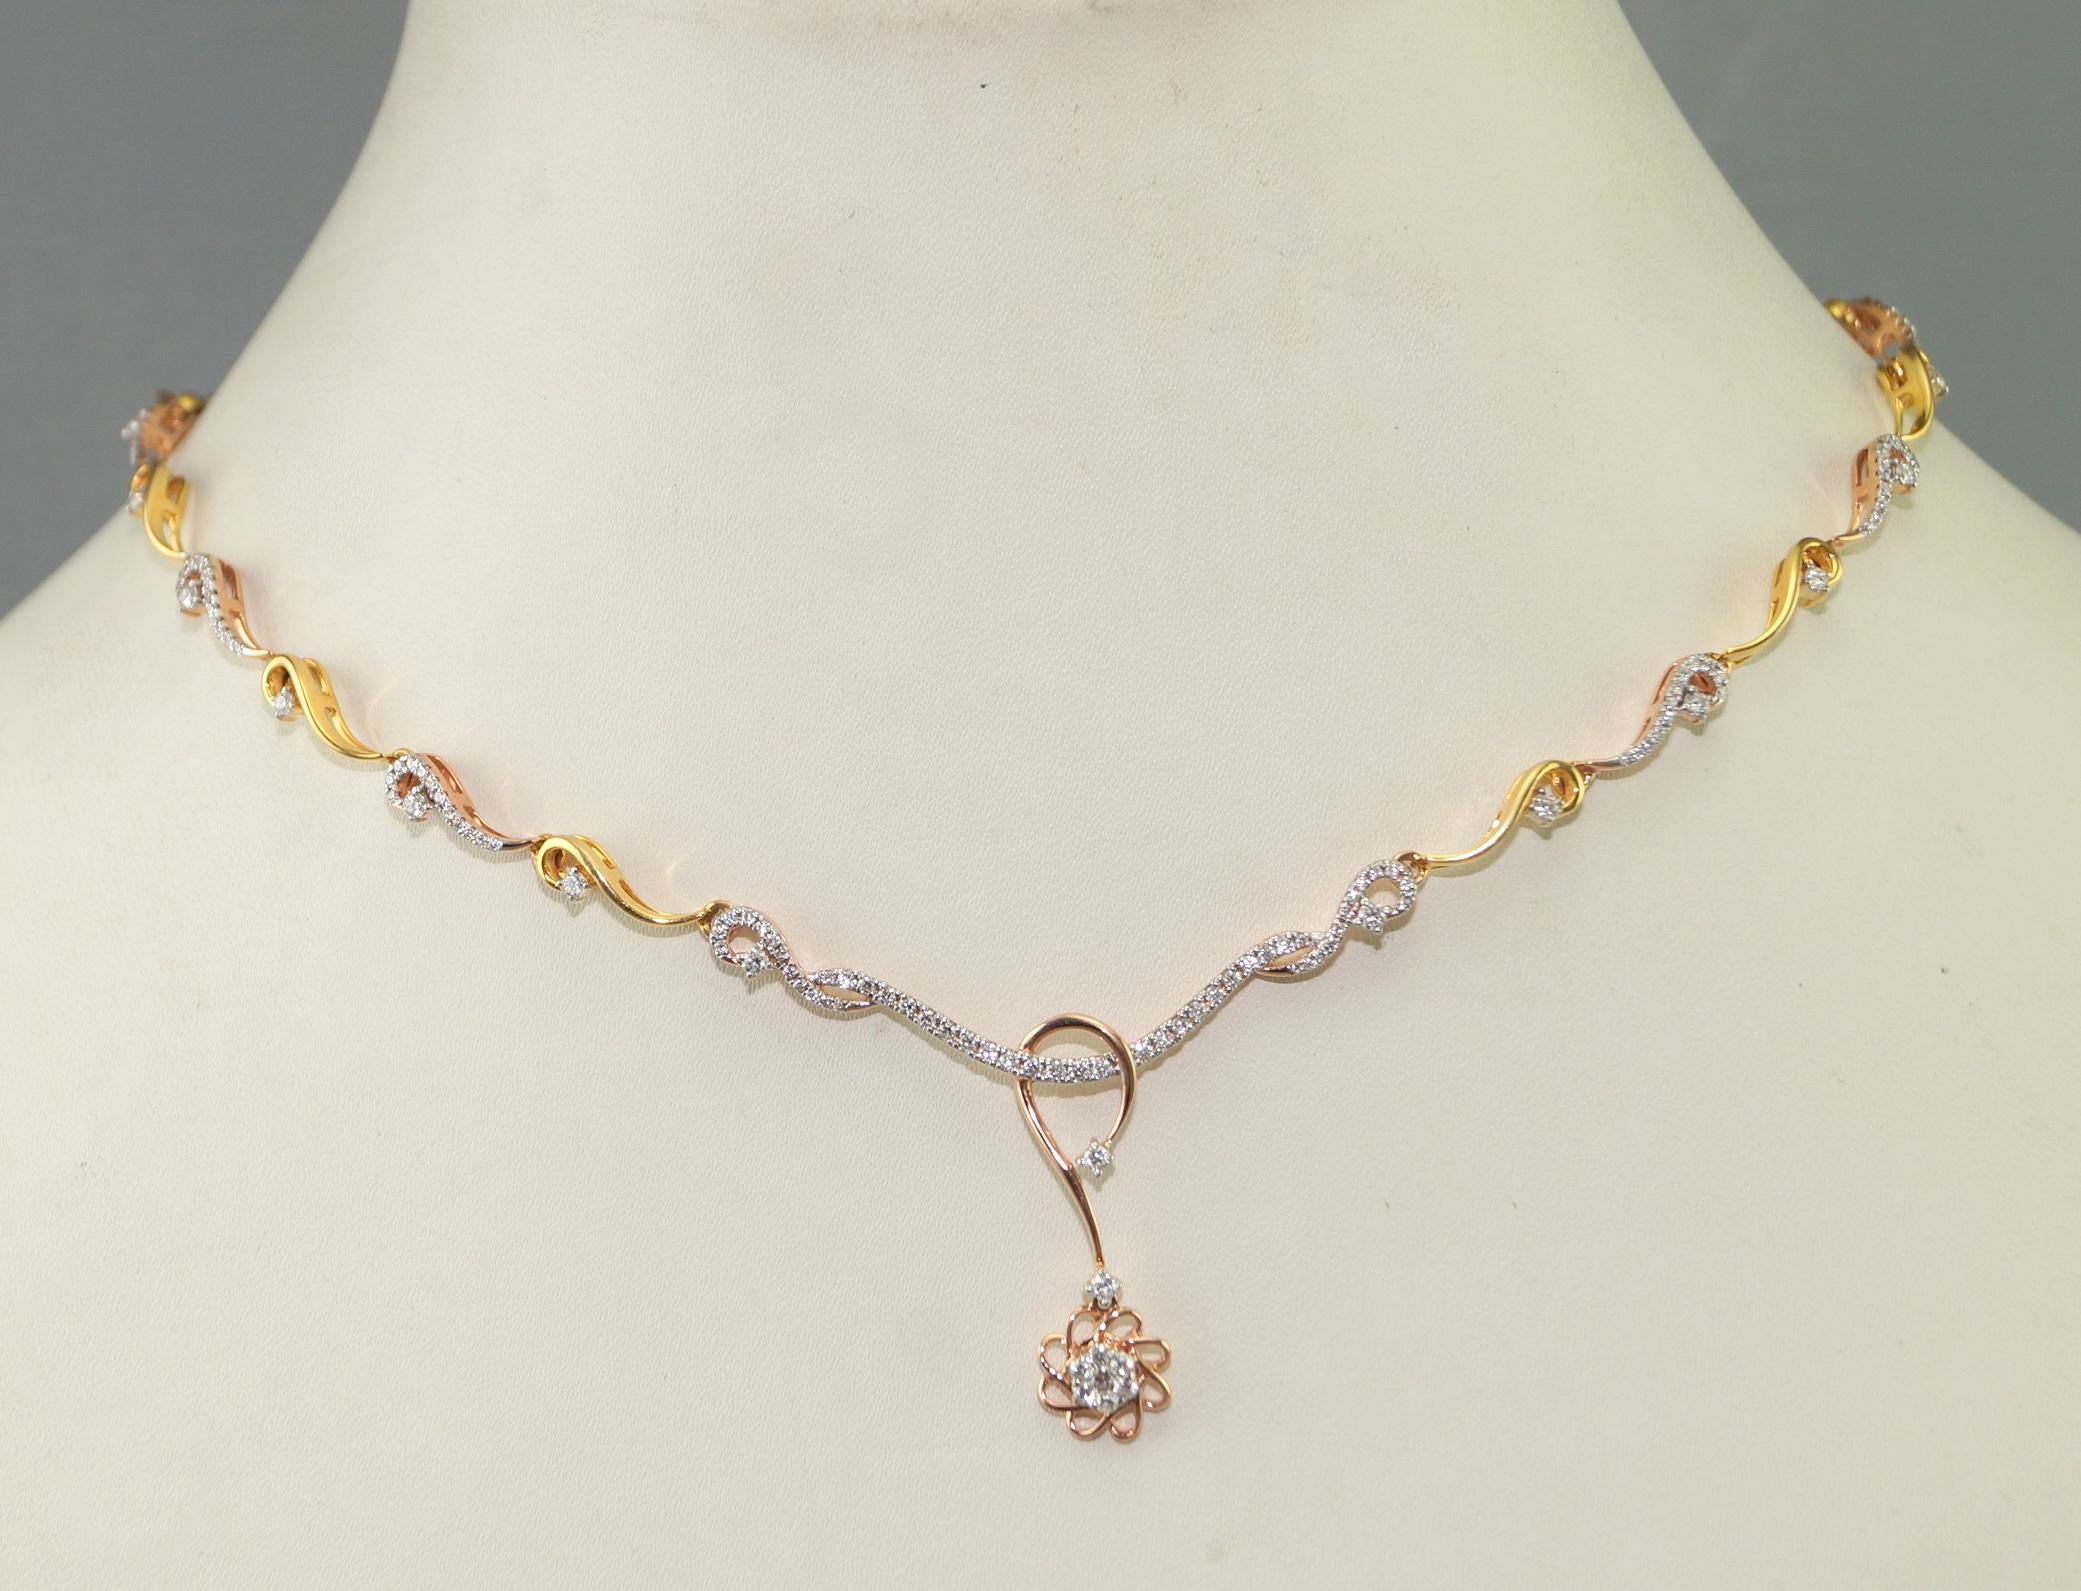 This gorgeous dual tone diamond necklace with matching earrings in solid 18K gold is a pure perfection. This necklace set consists of:

Net weight- 18.02 grams

Diamond type- Brilliant cut diamonds
Diamond origin- Natural real
Diamond weight-